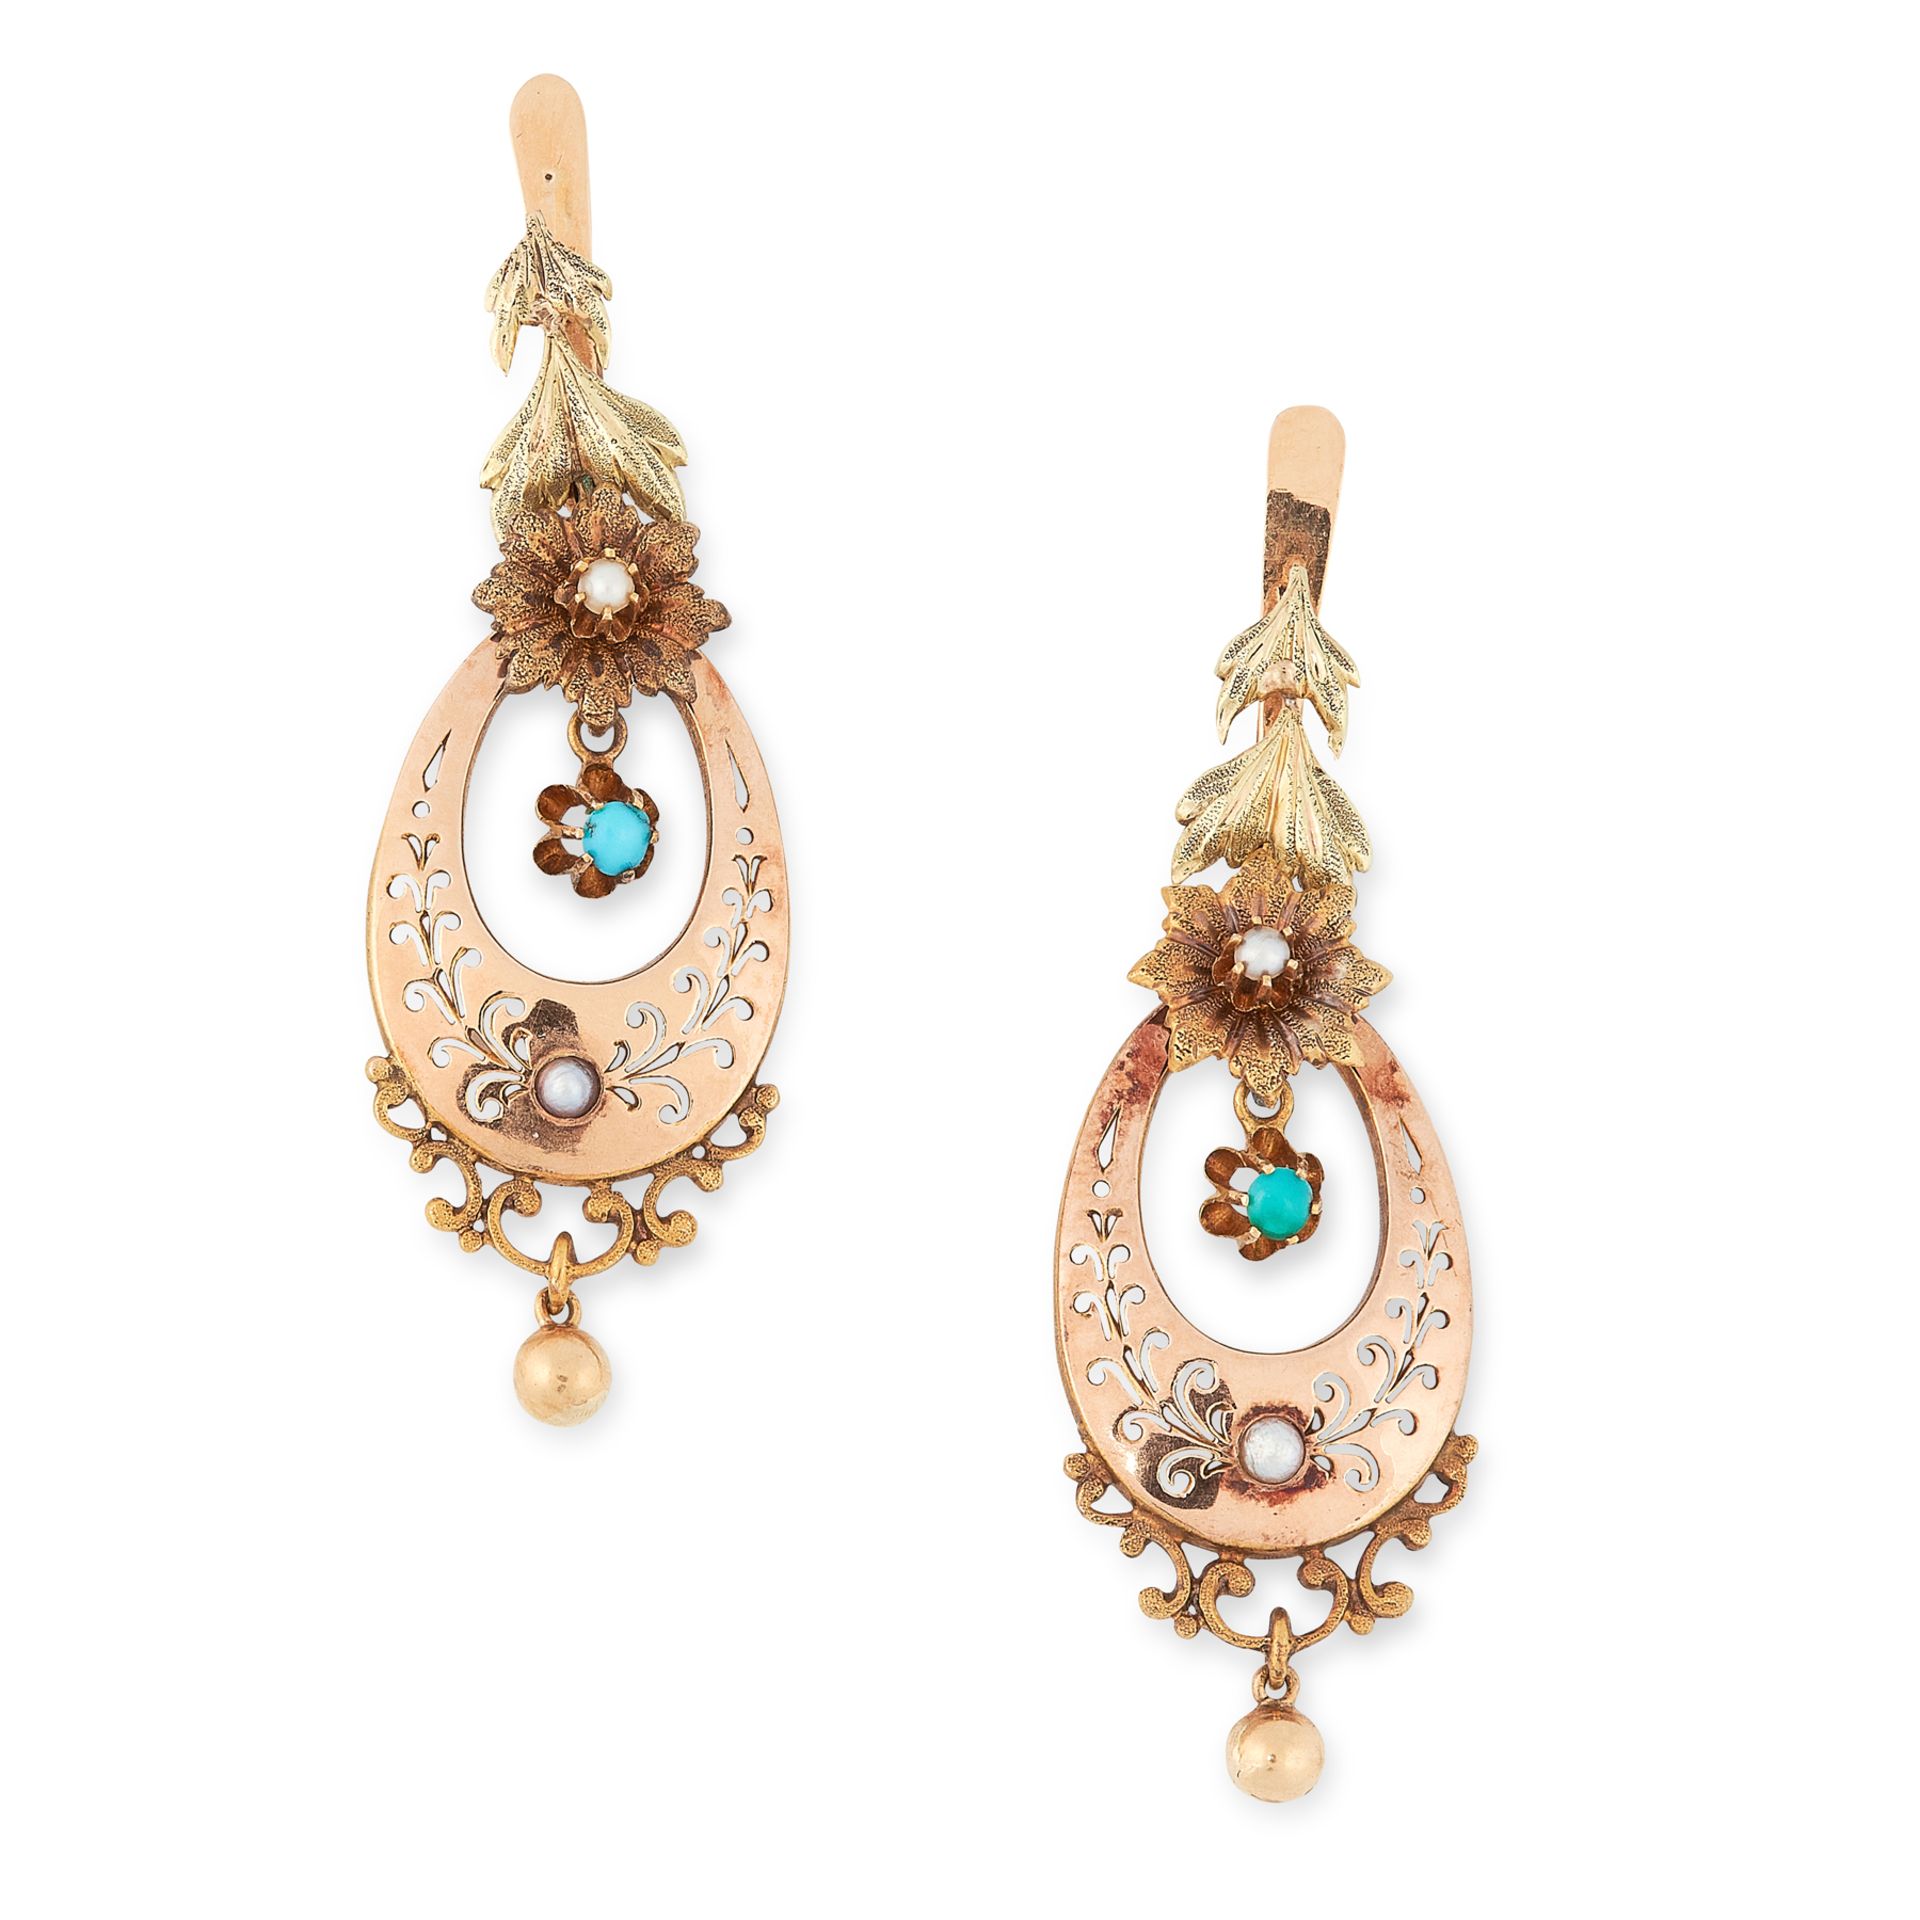 A PAIR OF ANTIQUE TURQUOISE AND PEARL EARRINGS in yellow gold, each set with two pearls and a